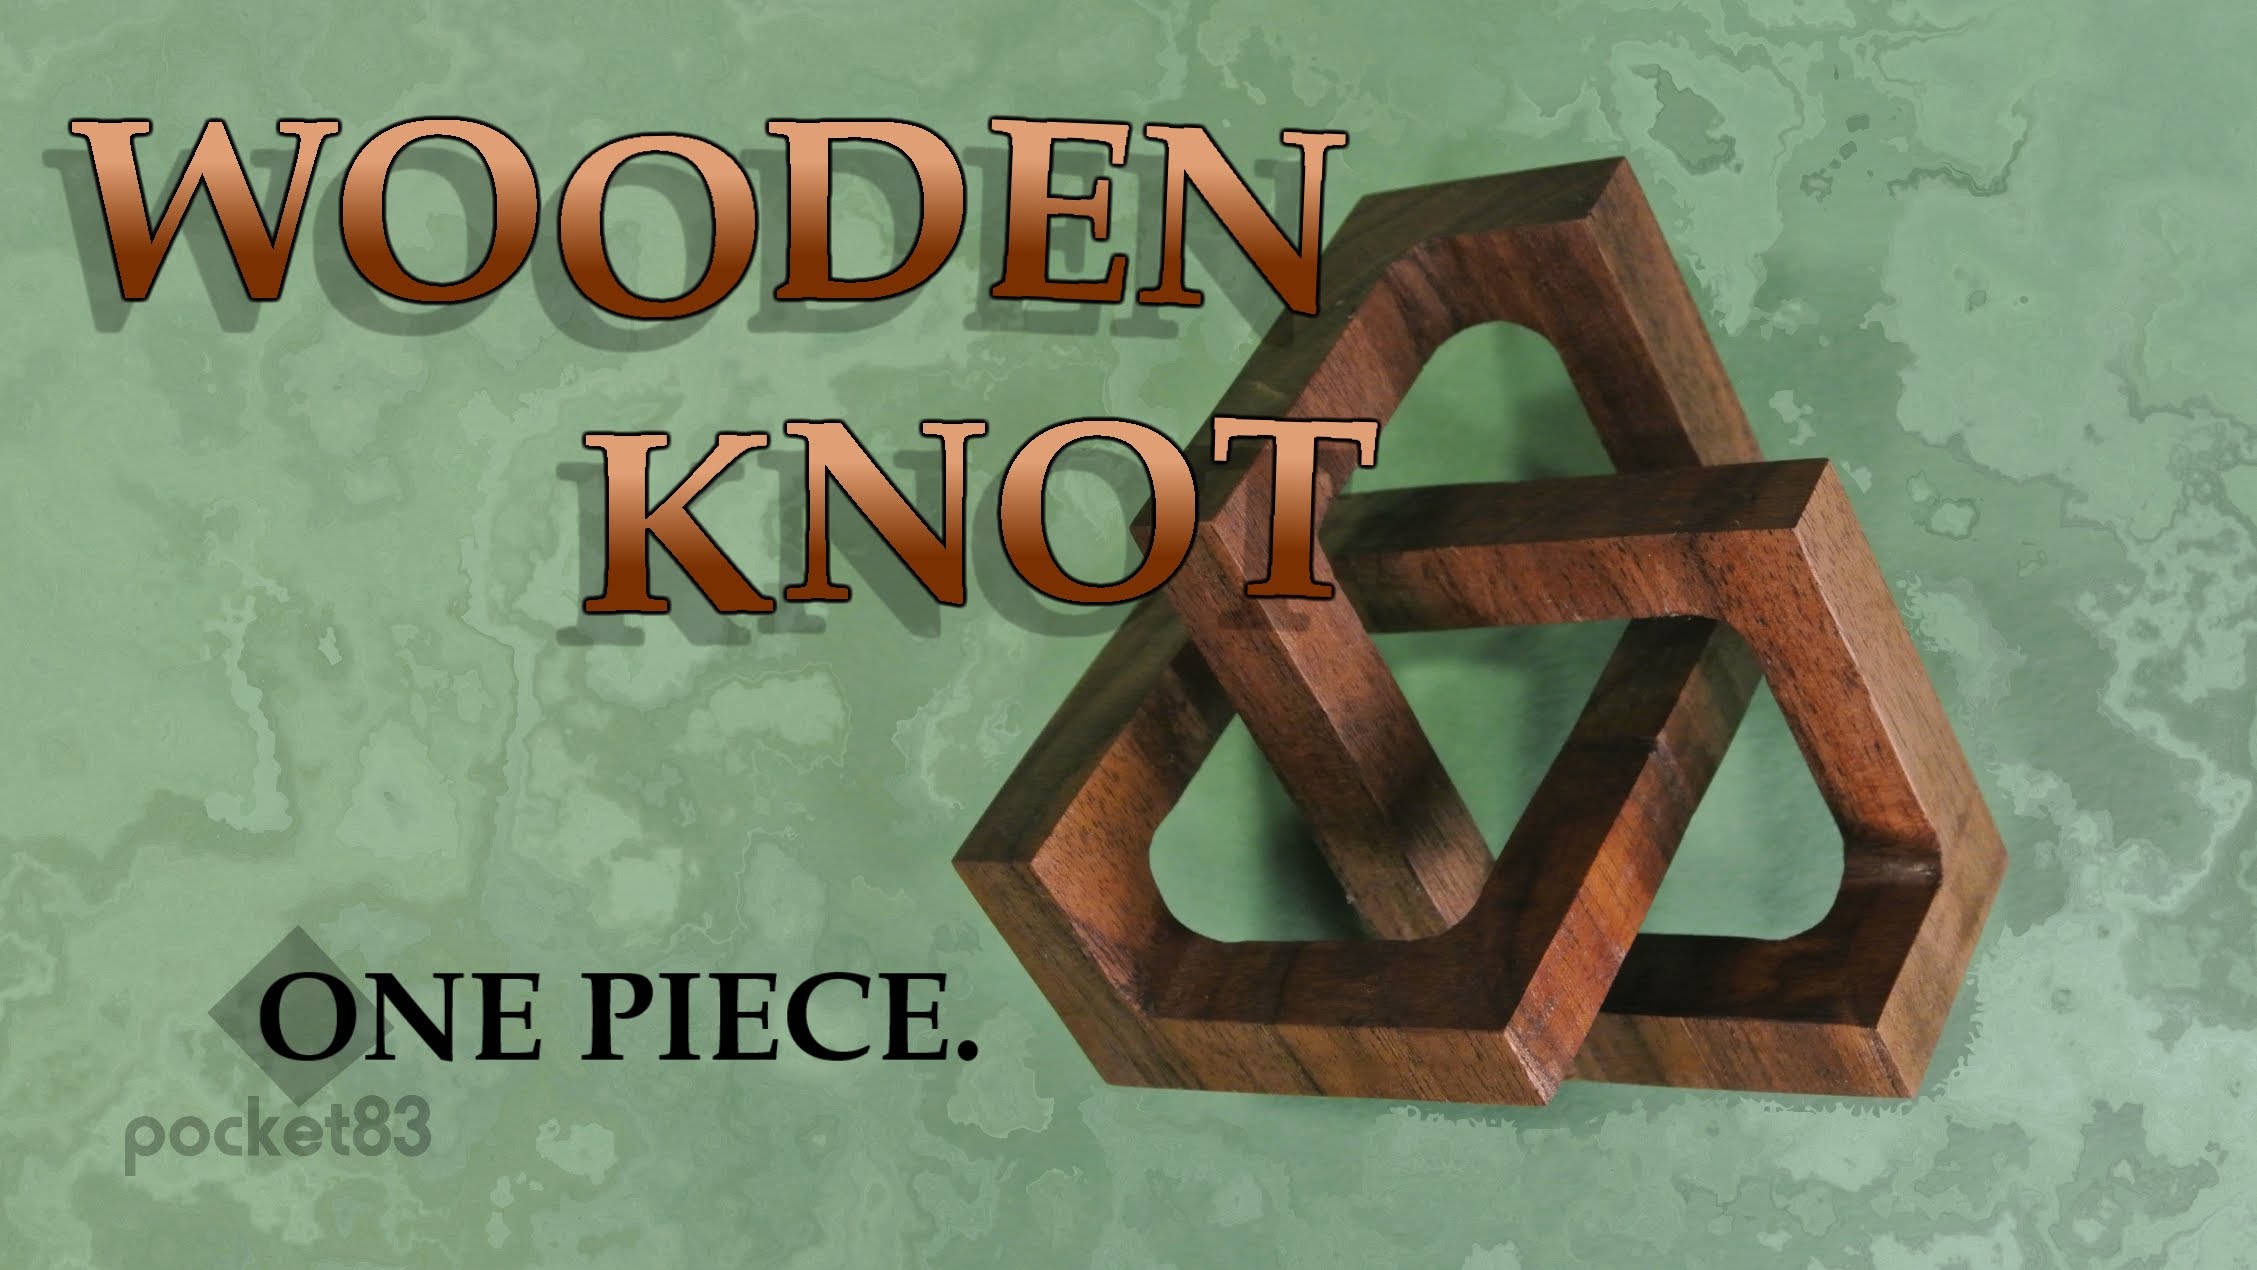 Making a cubic trefoil knot from solid wood - YouTube